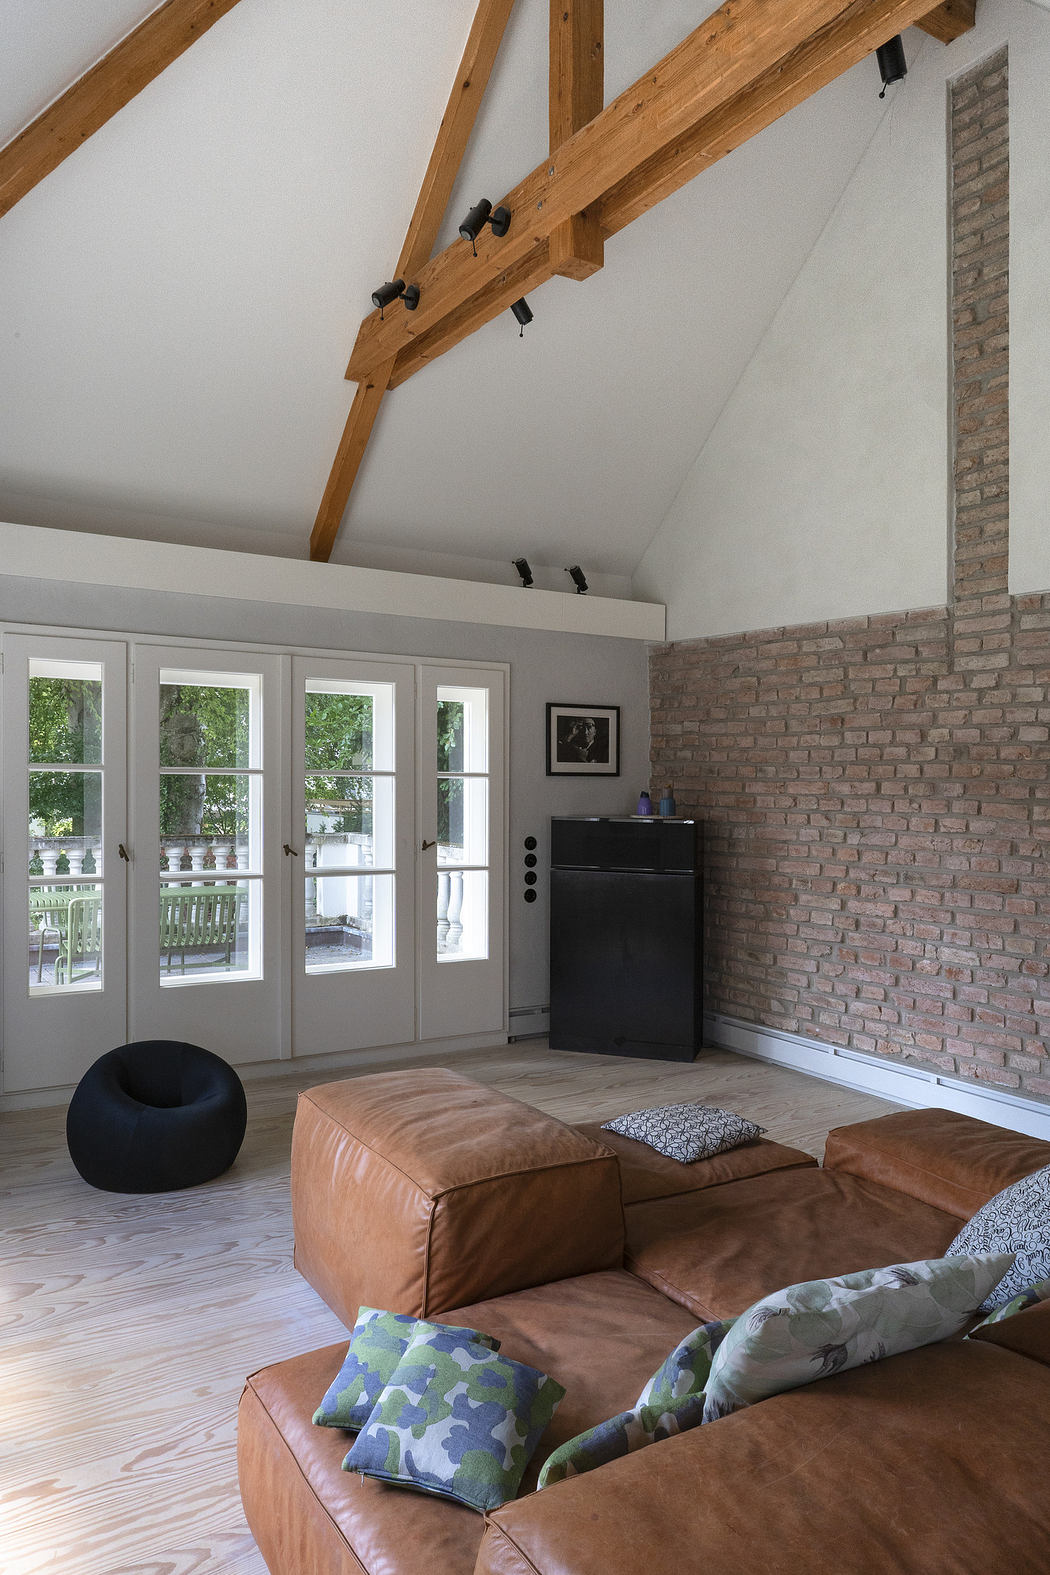 Modern living room with exposed beams, brick wall, and leather sofa.